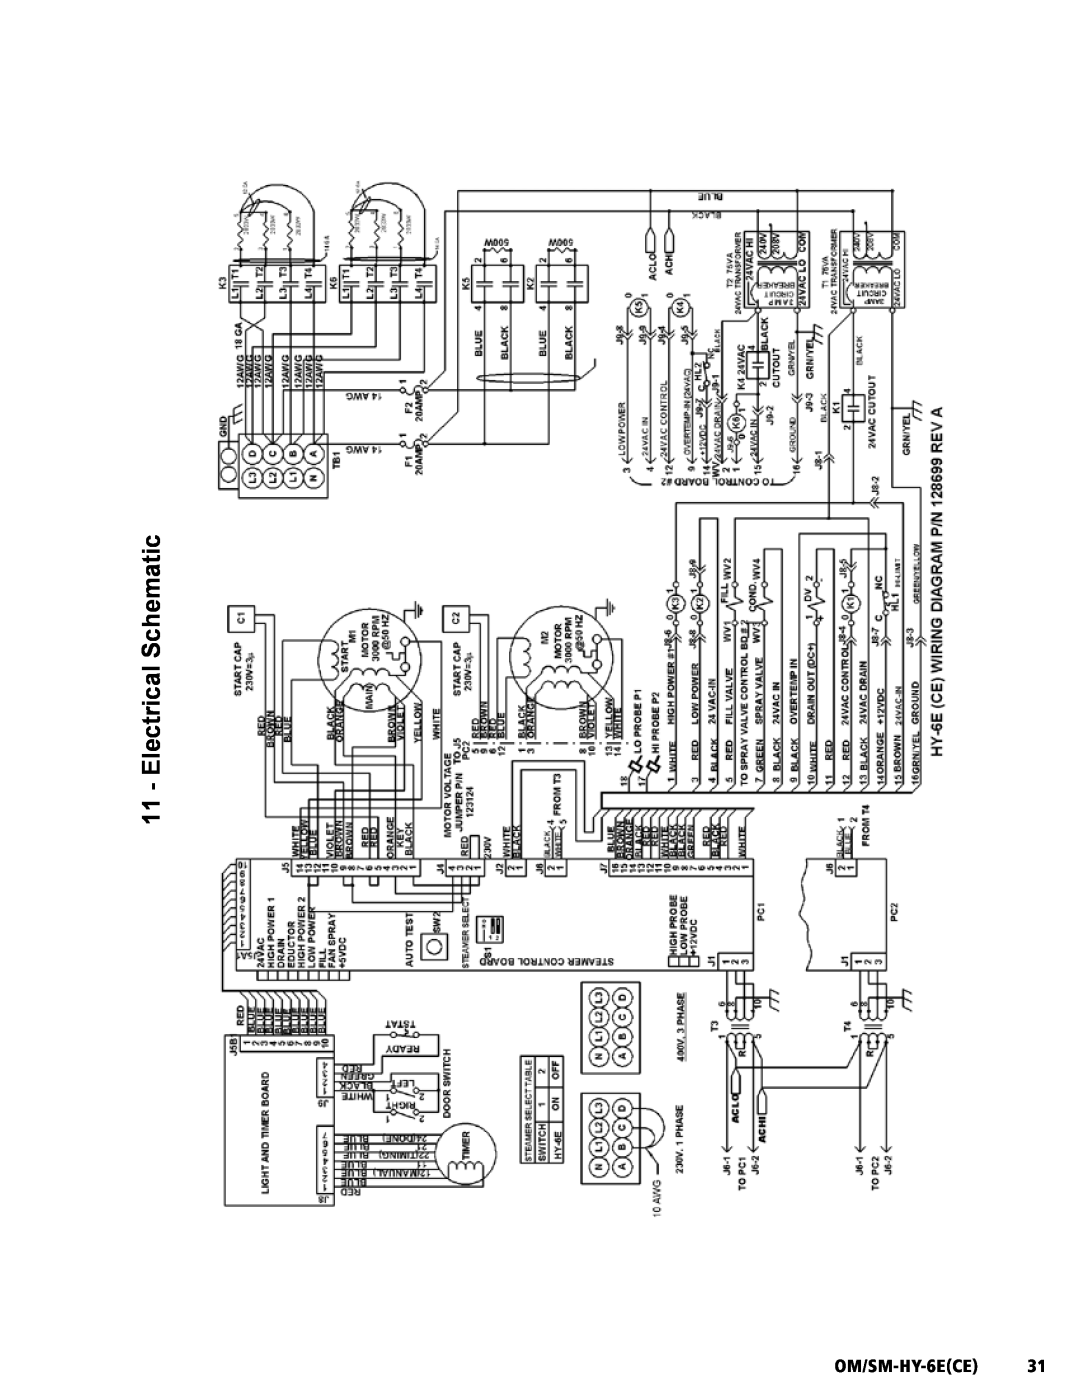 Unified Brands HY-6E(CE) service manual Electrical Schematic, OM/SM-HY-6ECE31 